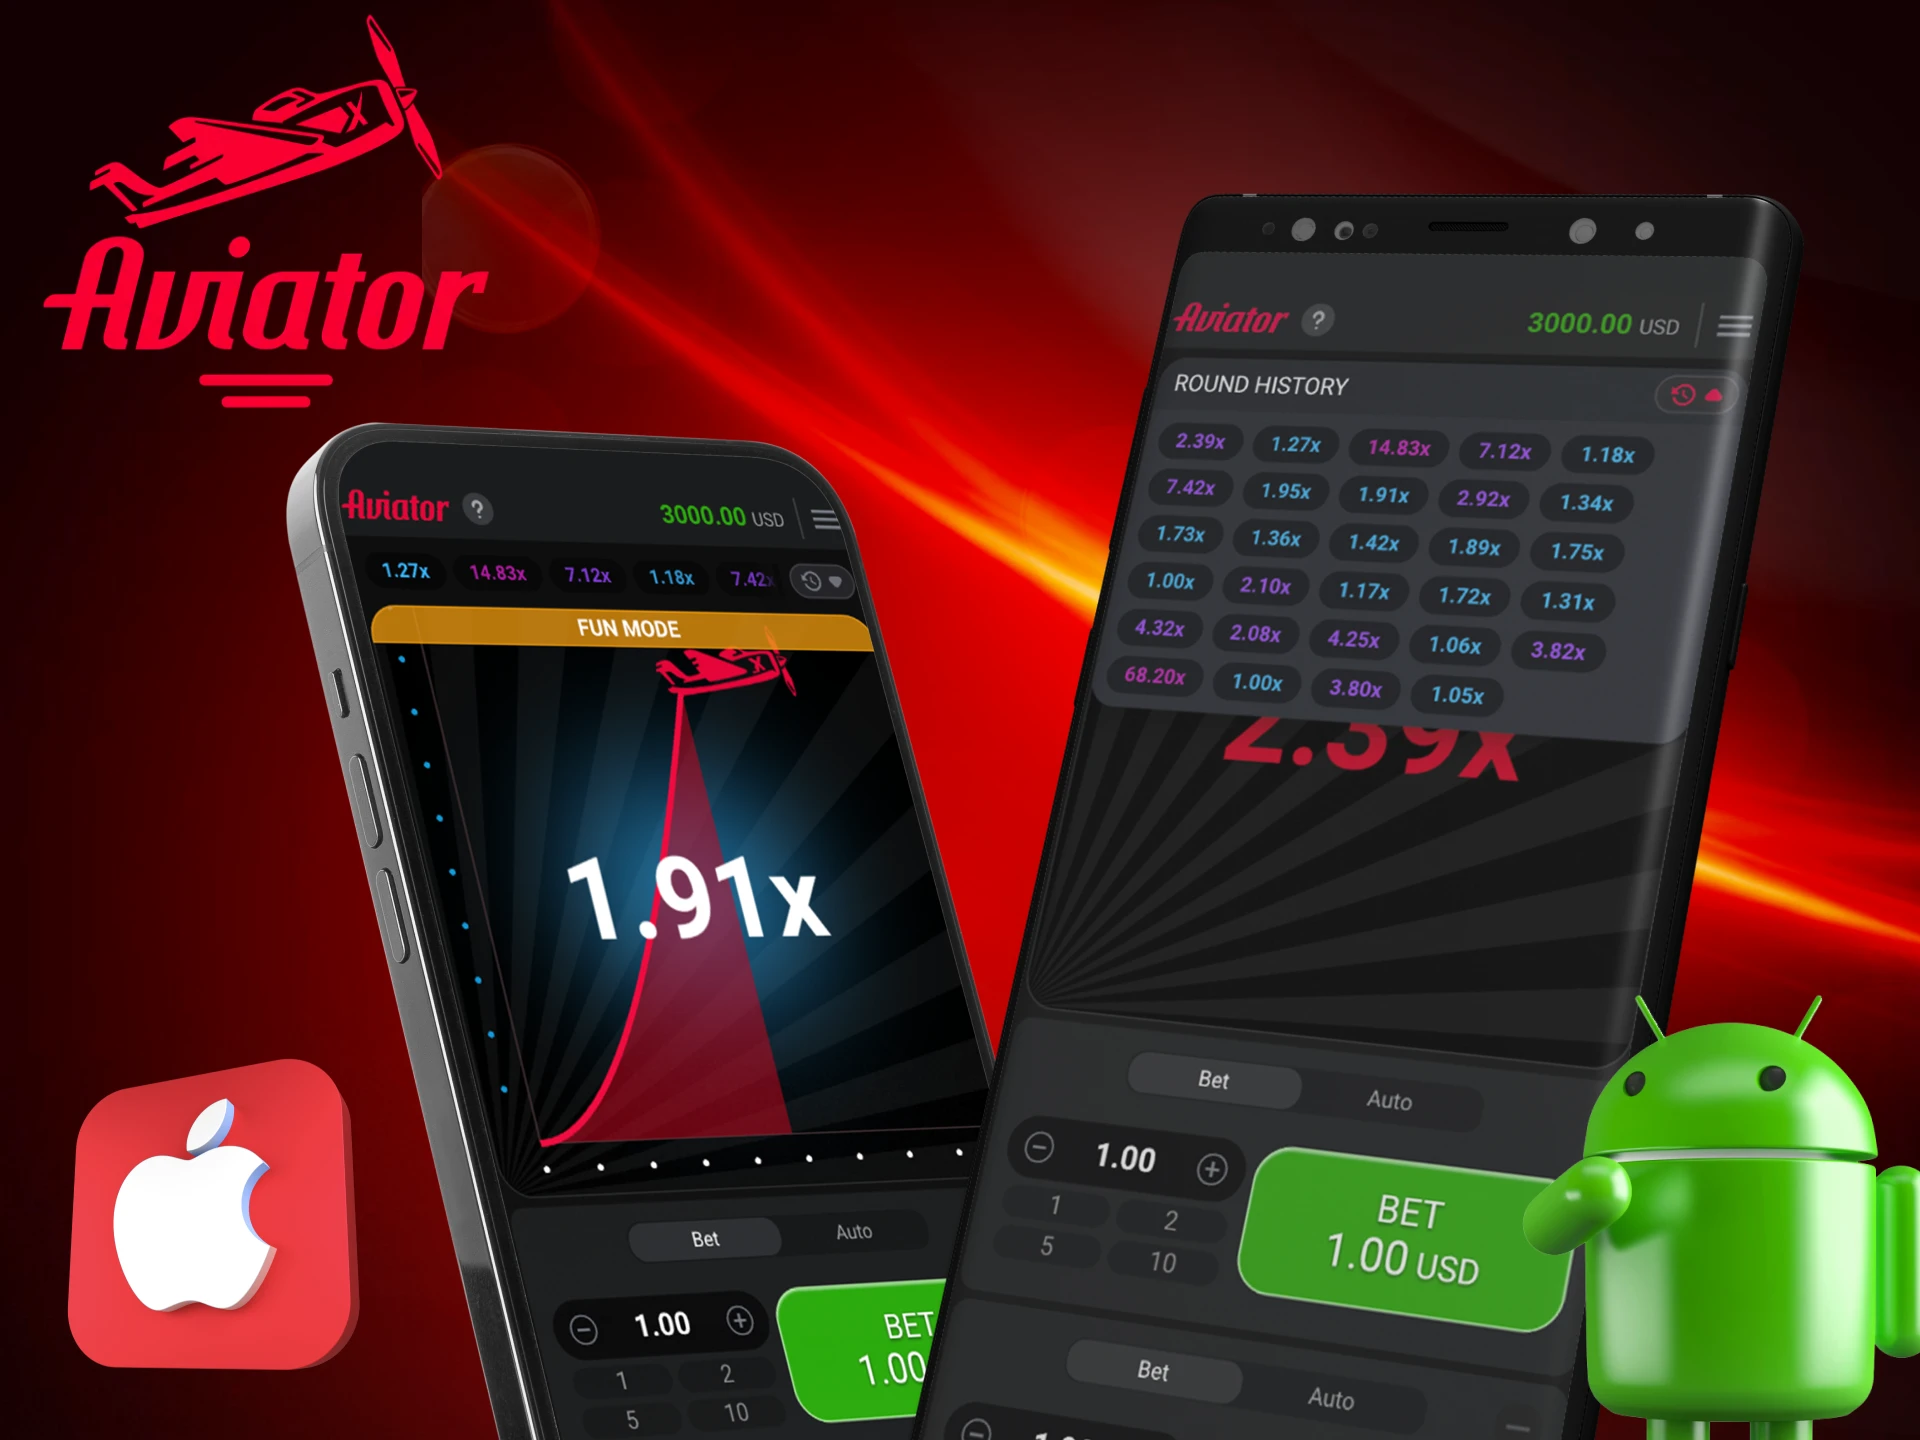 Mobile applications for Android and iOS are available for the Aviator game.